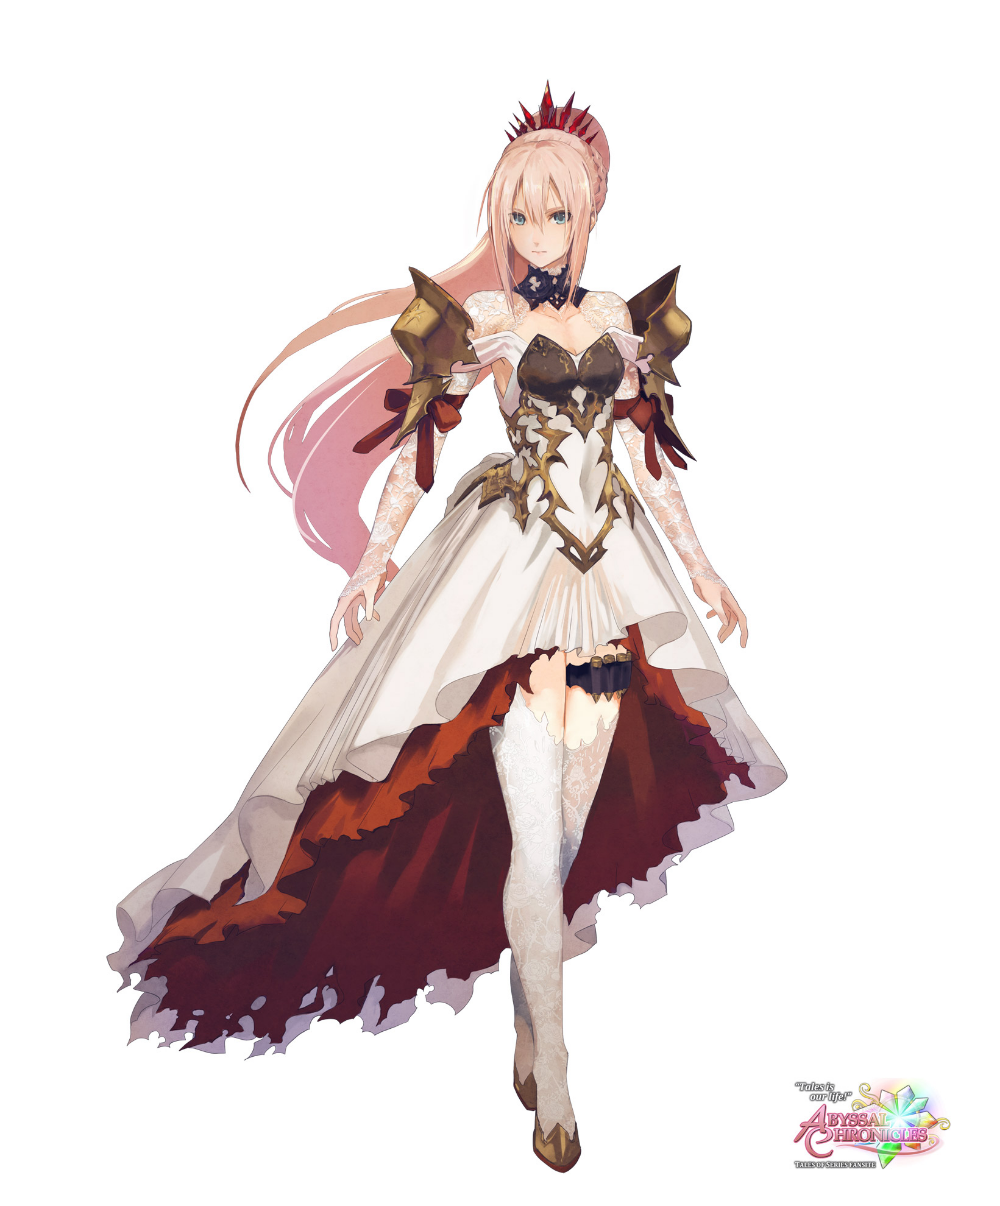 Meet Tales of Arise's Hero and Heroine, New Extended from Tales of Festival 2019. Anime warrior, Anime character design, Fantasy character design